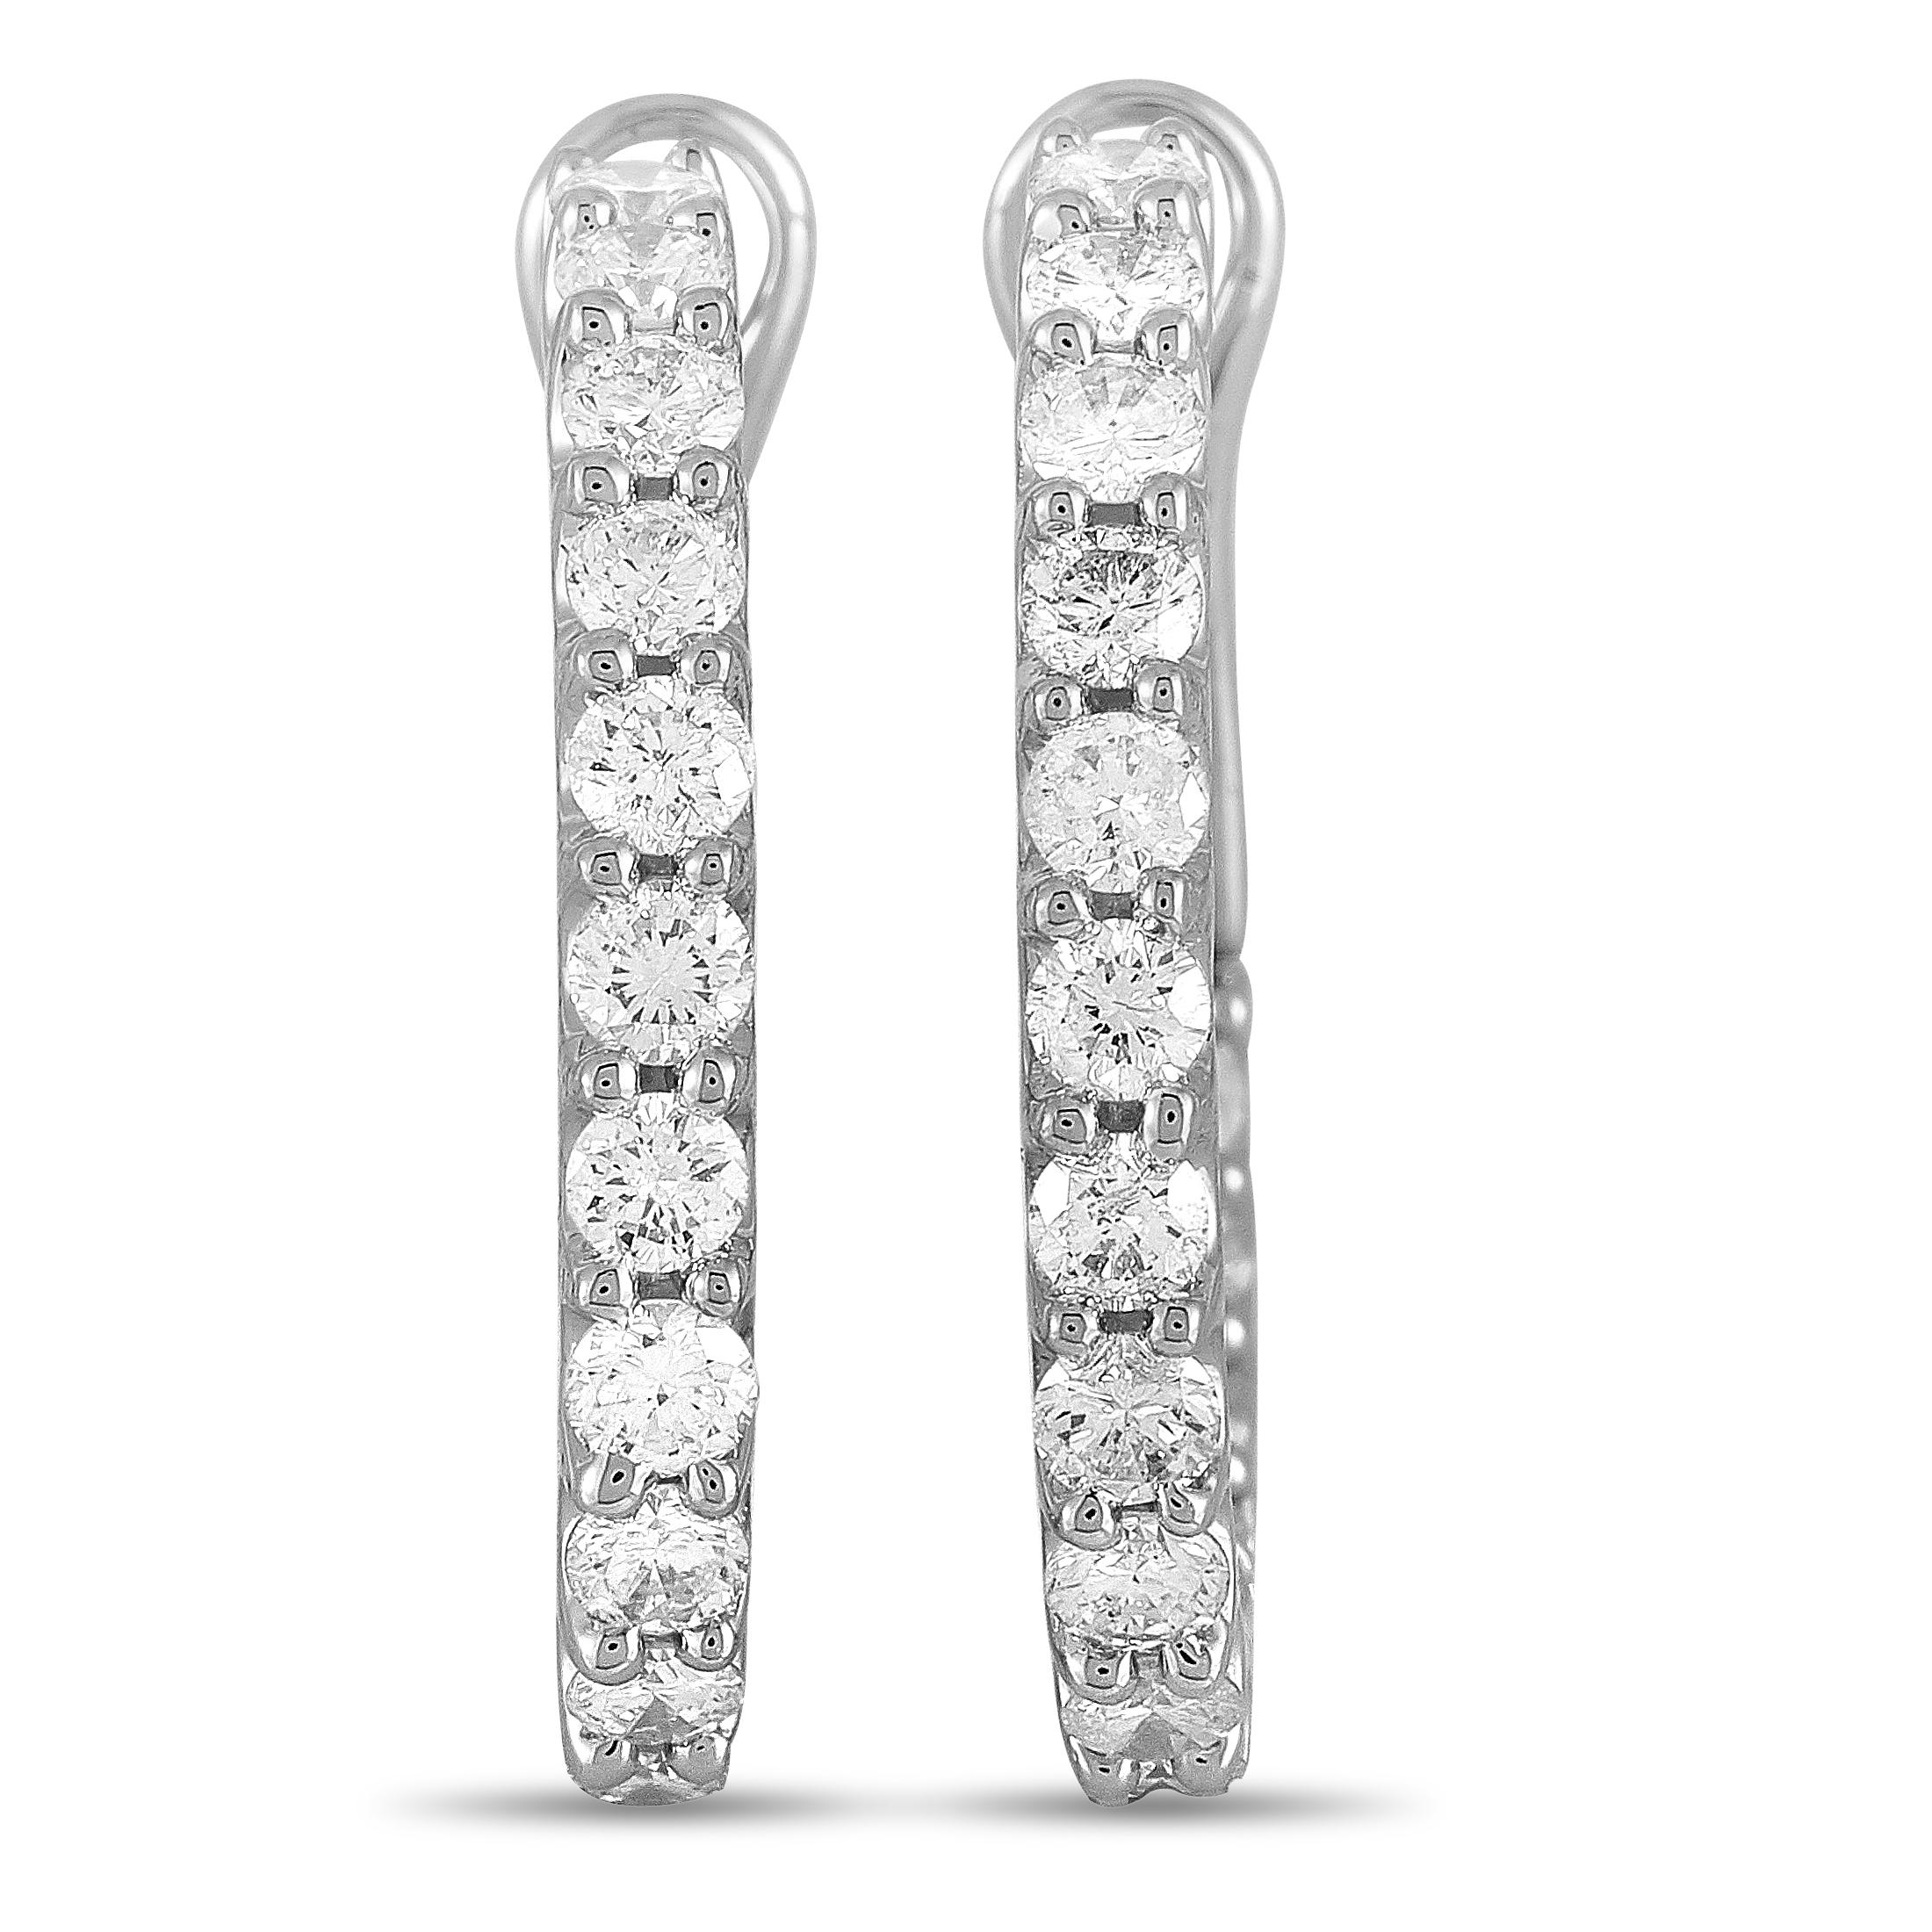 These LB Exclusive earrings are made out of 18K white gold and diamonds that total 1.50 carats. The earrings measure 1.87” in length and 0.75” in width, and each of the two weighs 3.1 grams.

The pair is offered in brand new condition and includes a